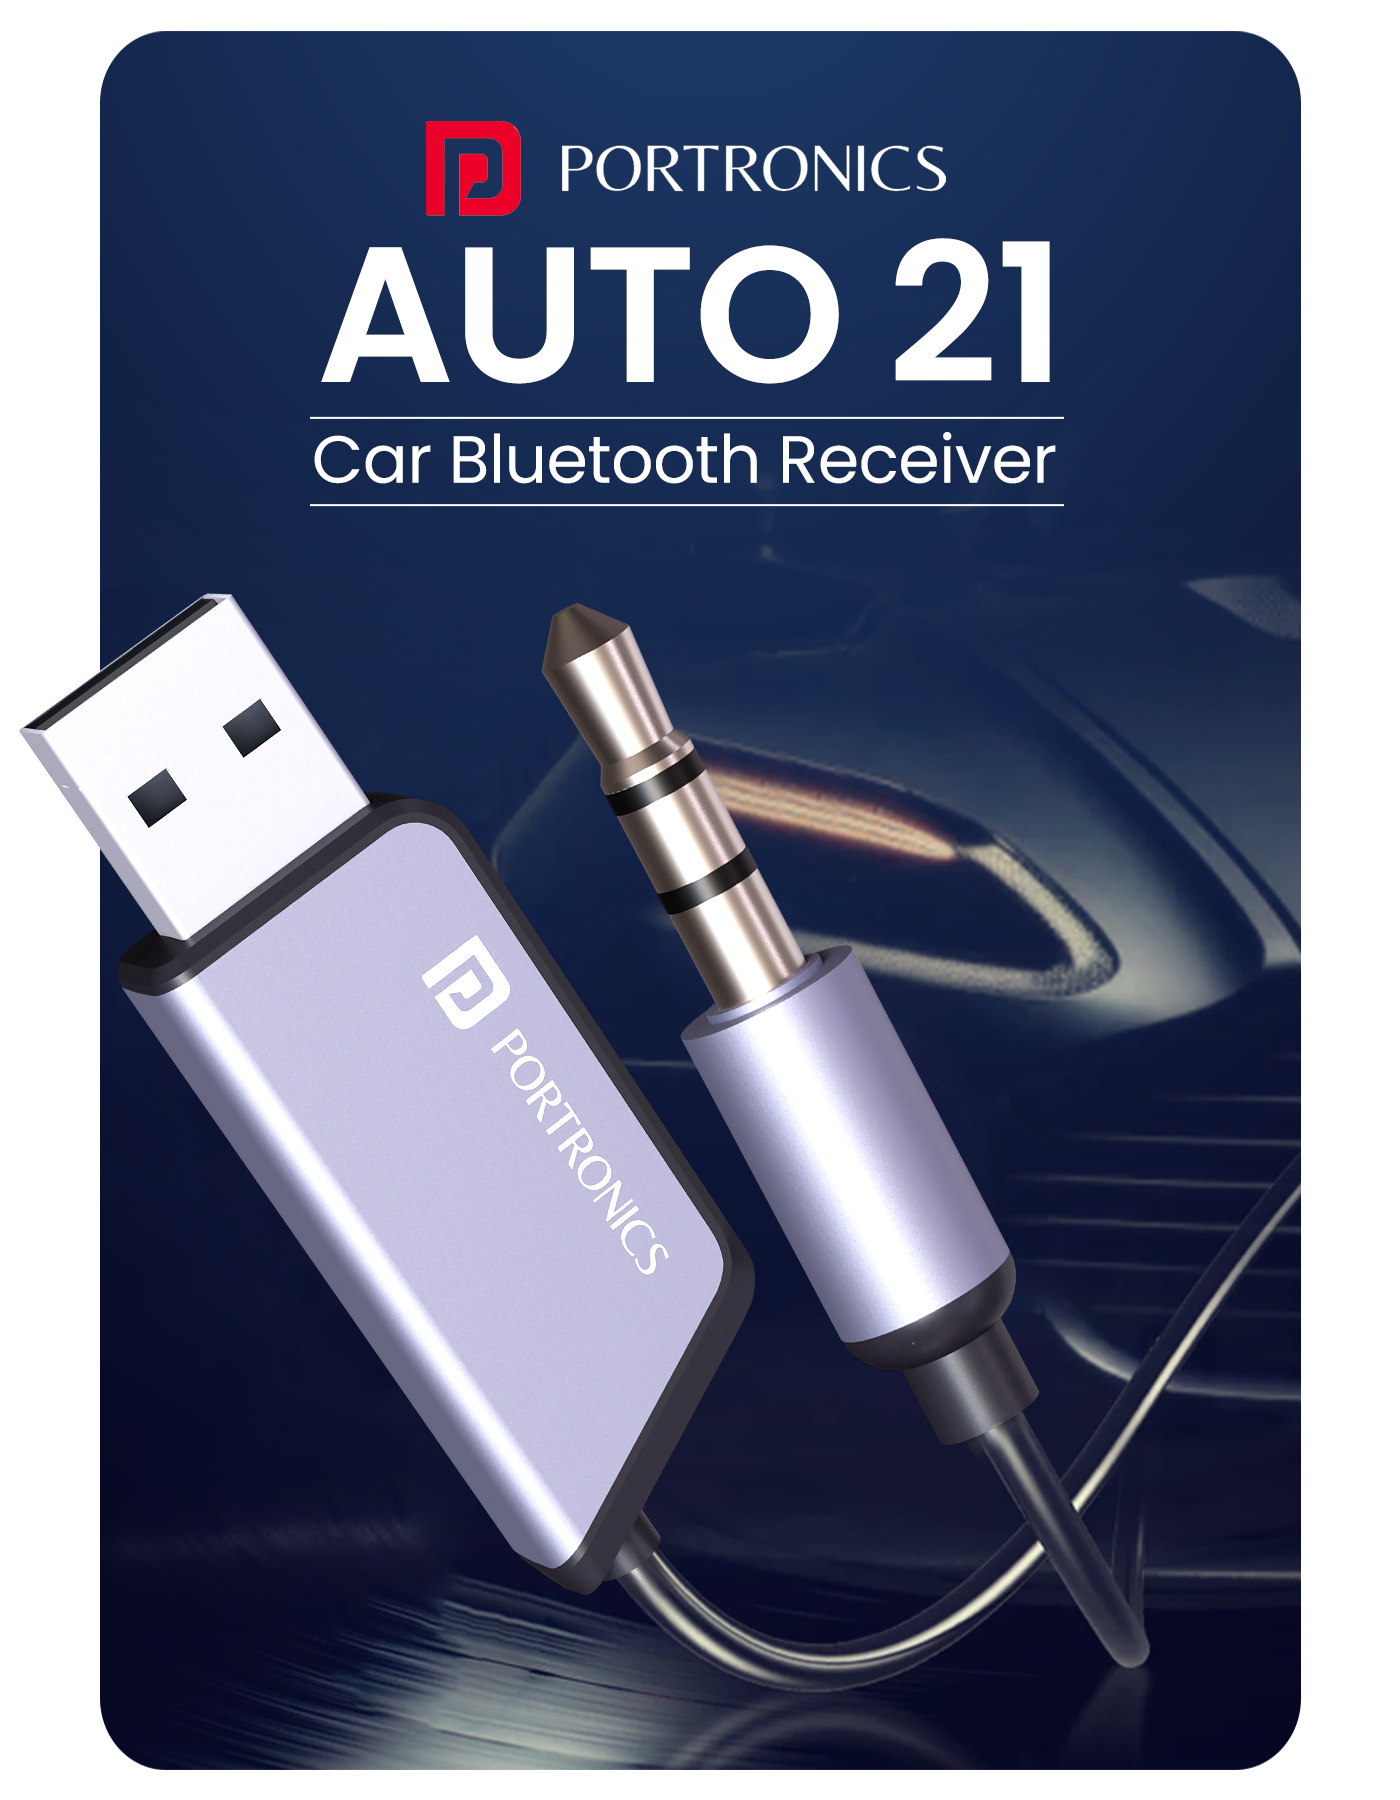 Portronics Auto 21 smart car connector enjoy hands free calling wile driving